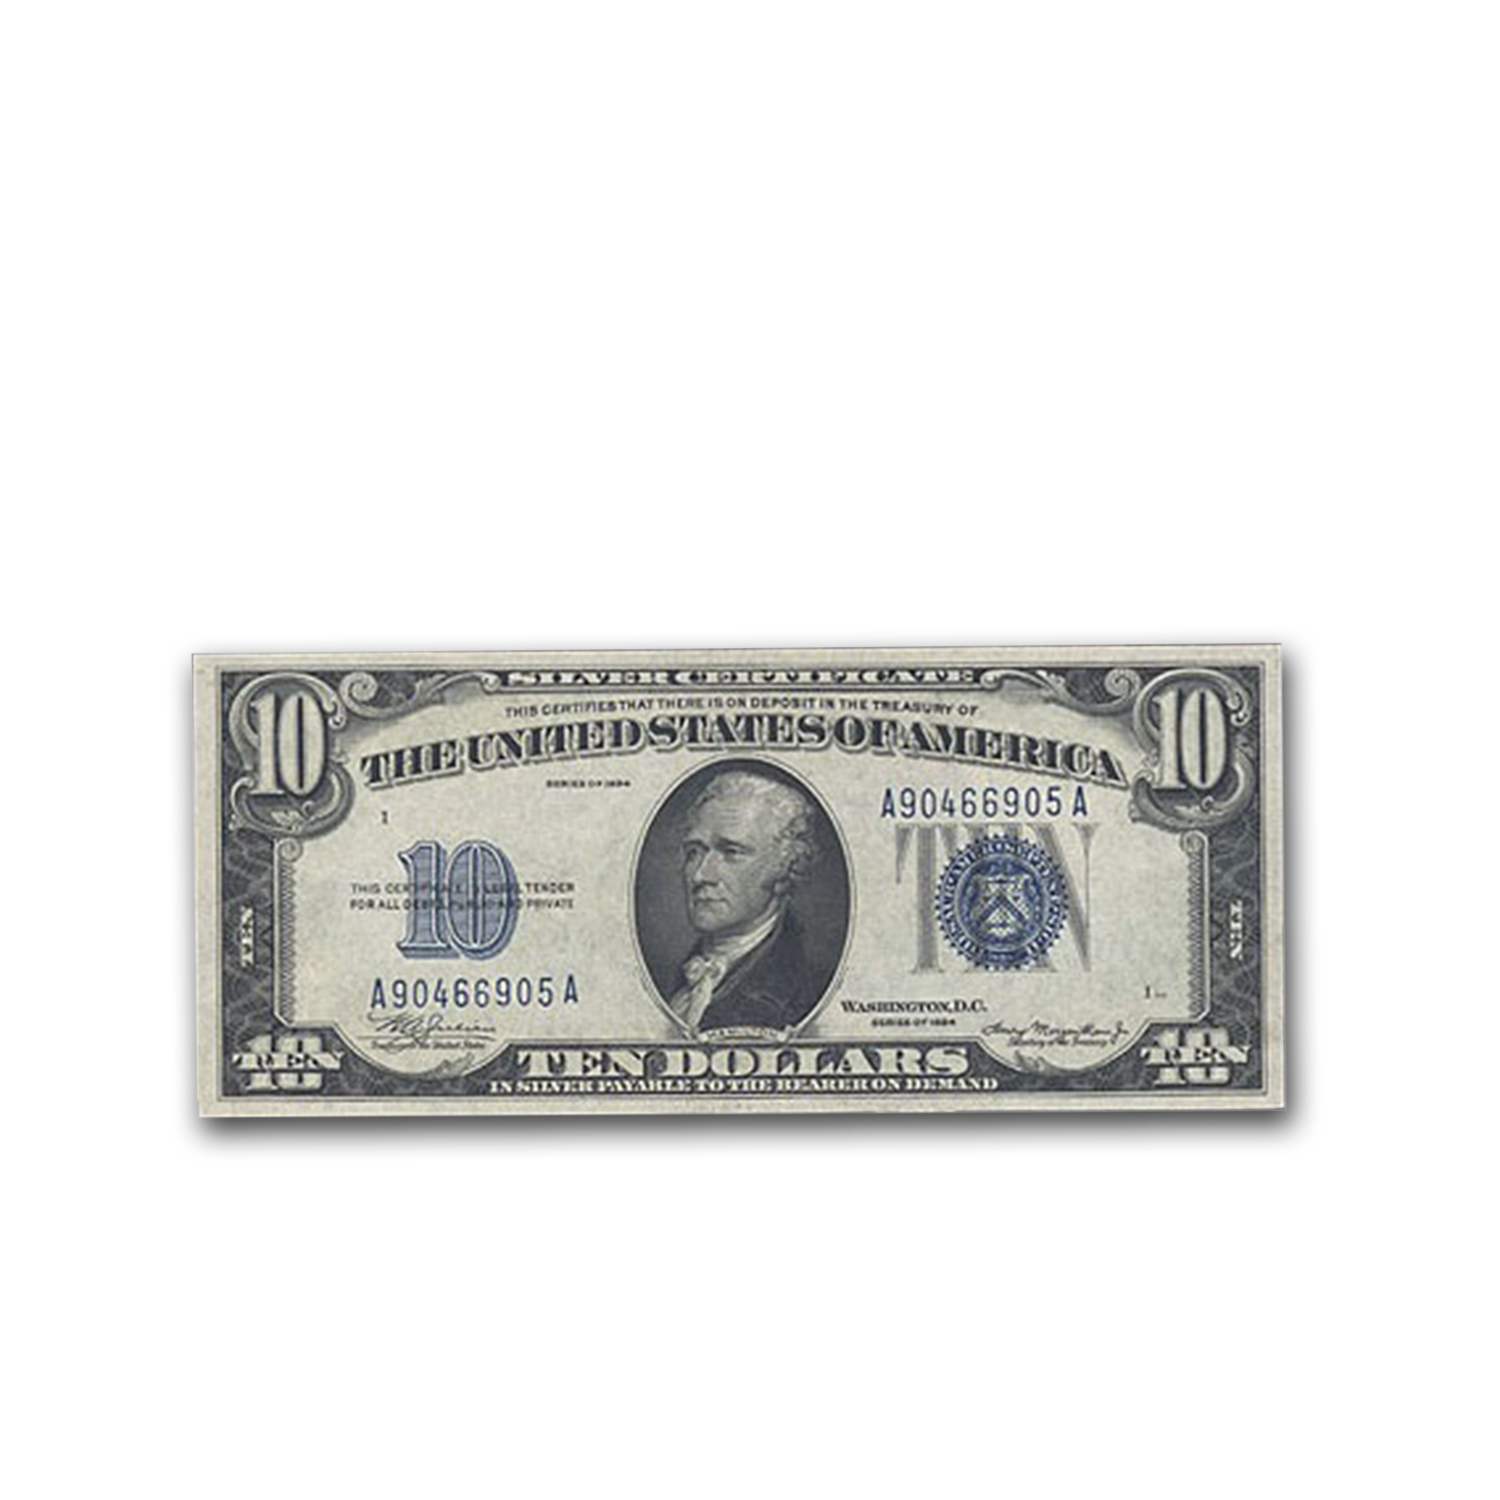 1 Federal Reserve  Note XF Circulated Condition L $1.00 Series 977-A 